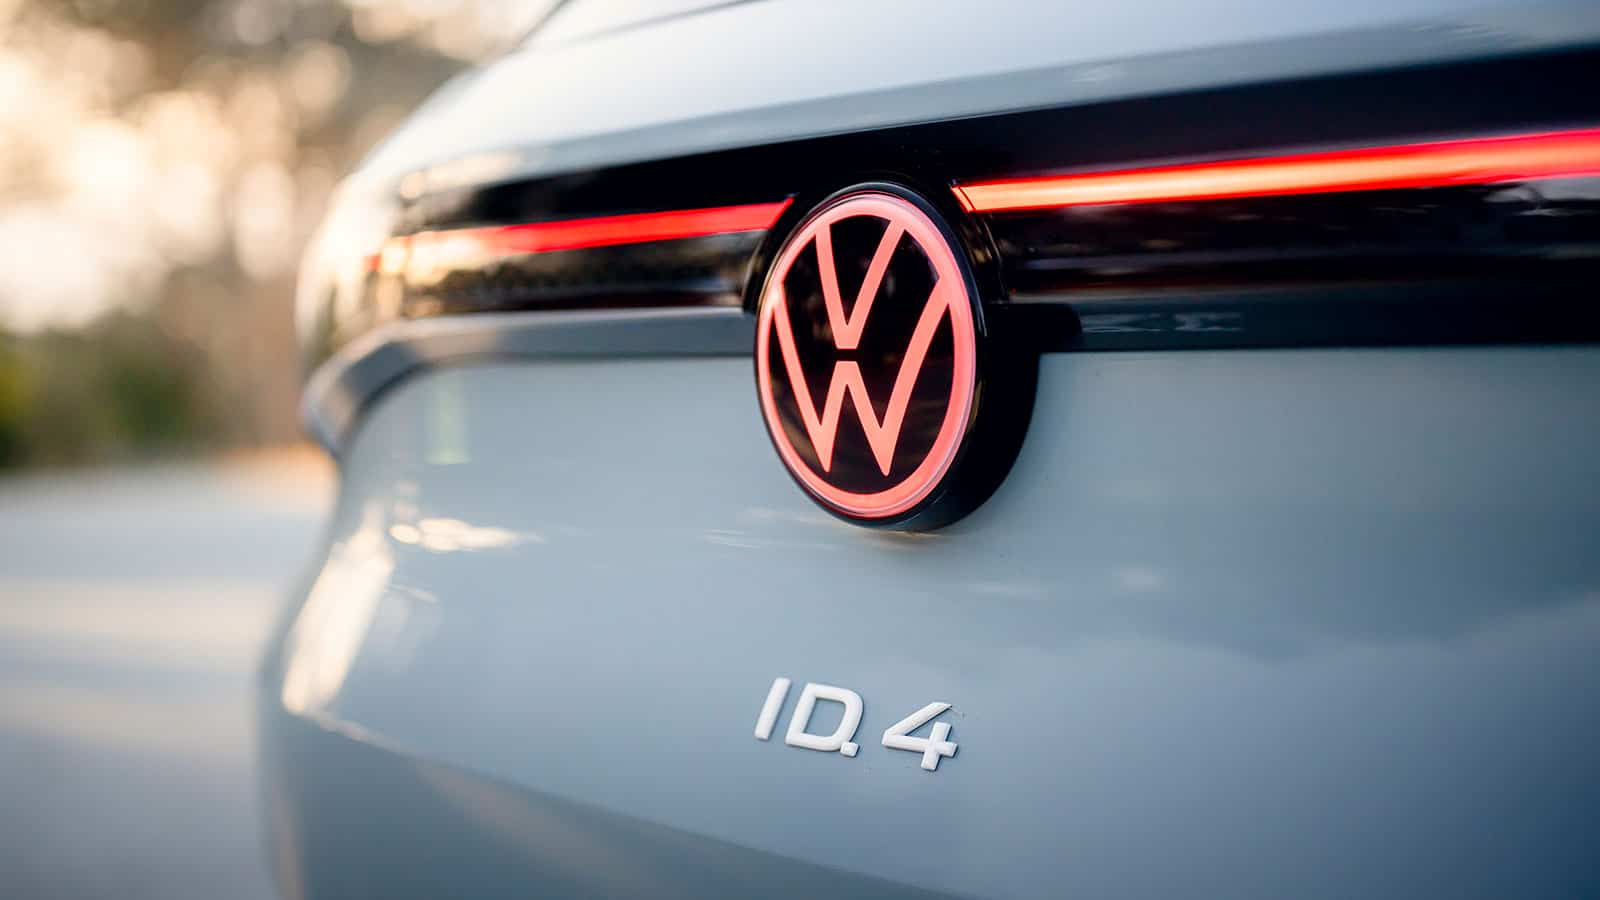 Volkswagen ID.4 close up of rear emblem and "ID.4", qualifies for tax credit